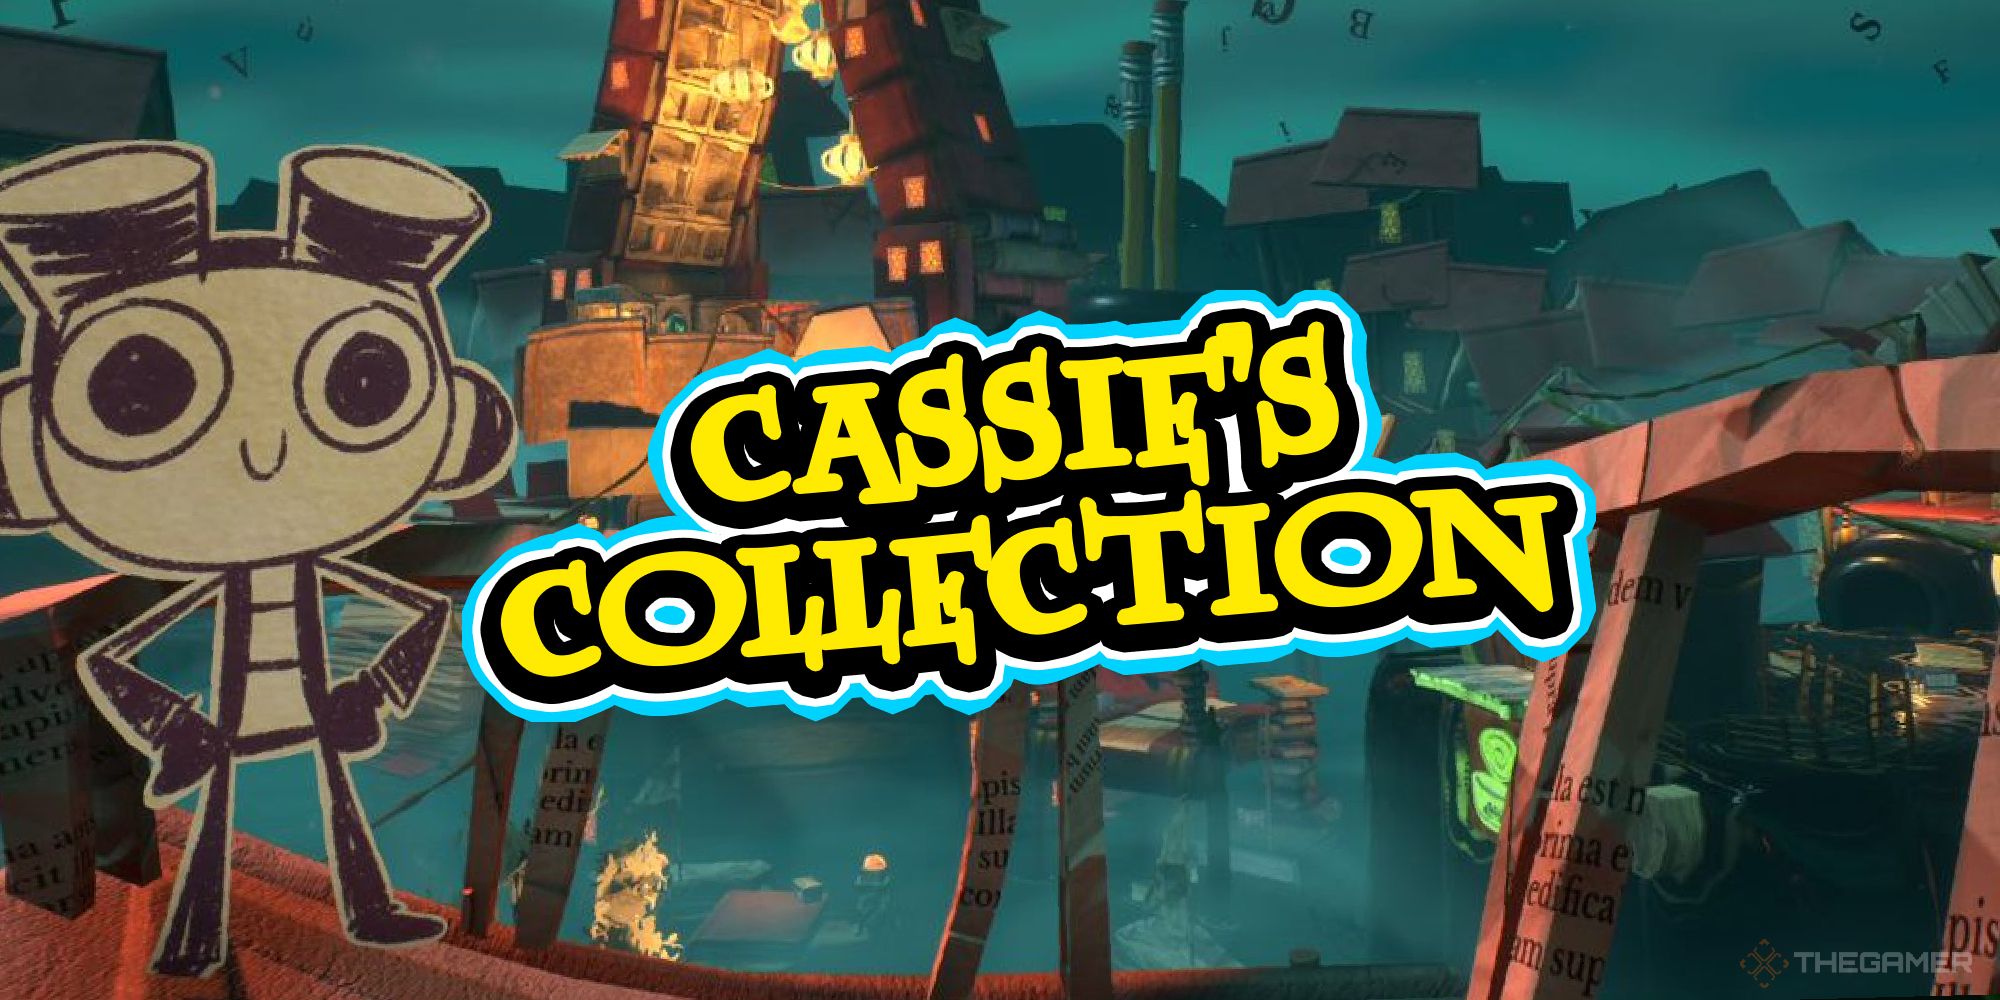 How To Find Every Collectible In Cassies Collection In Psychonauts 2